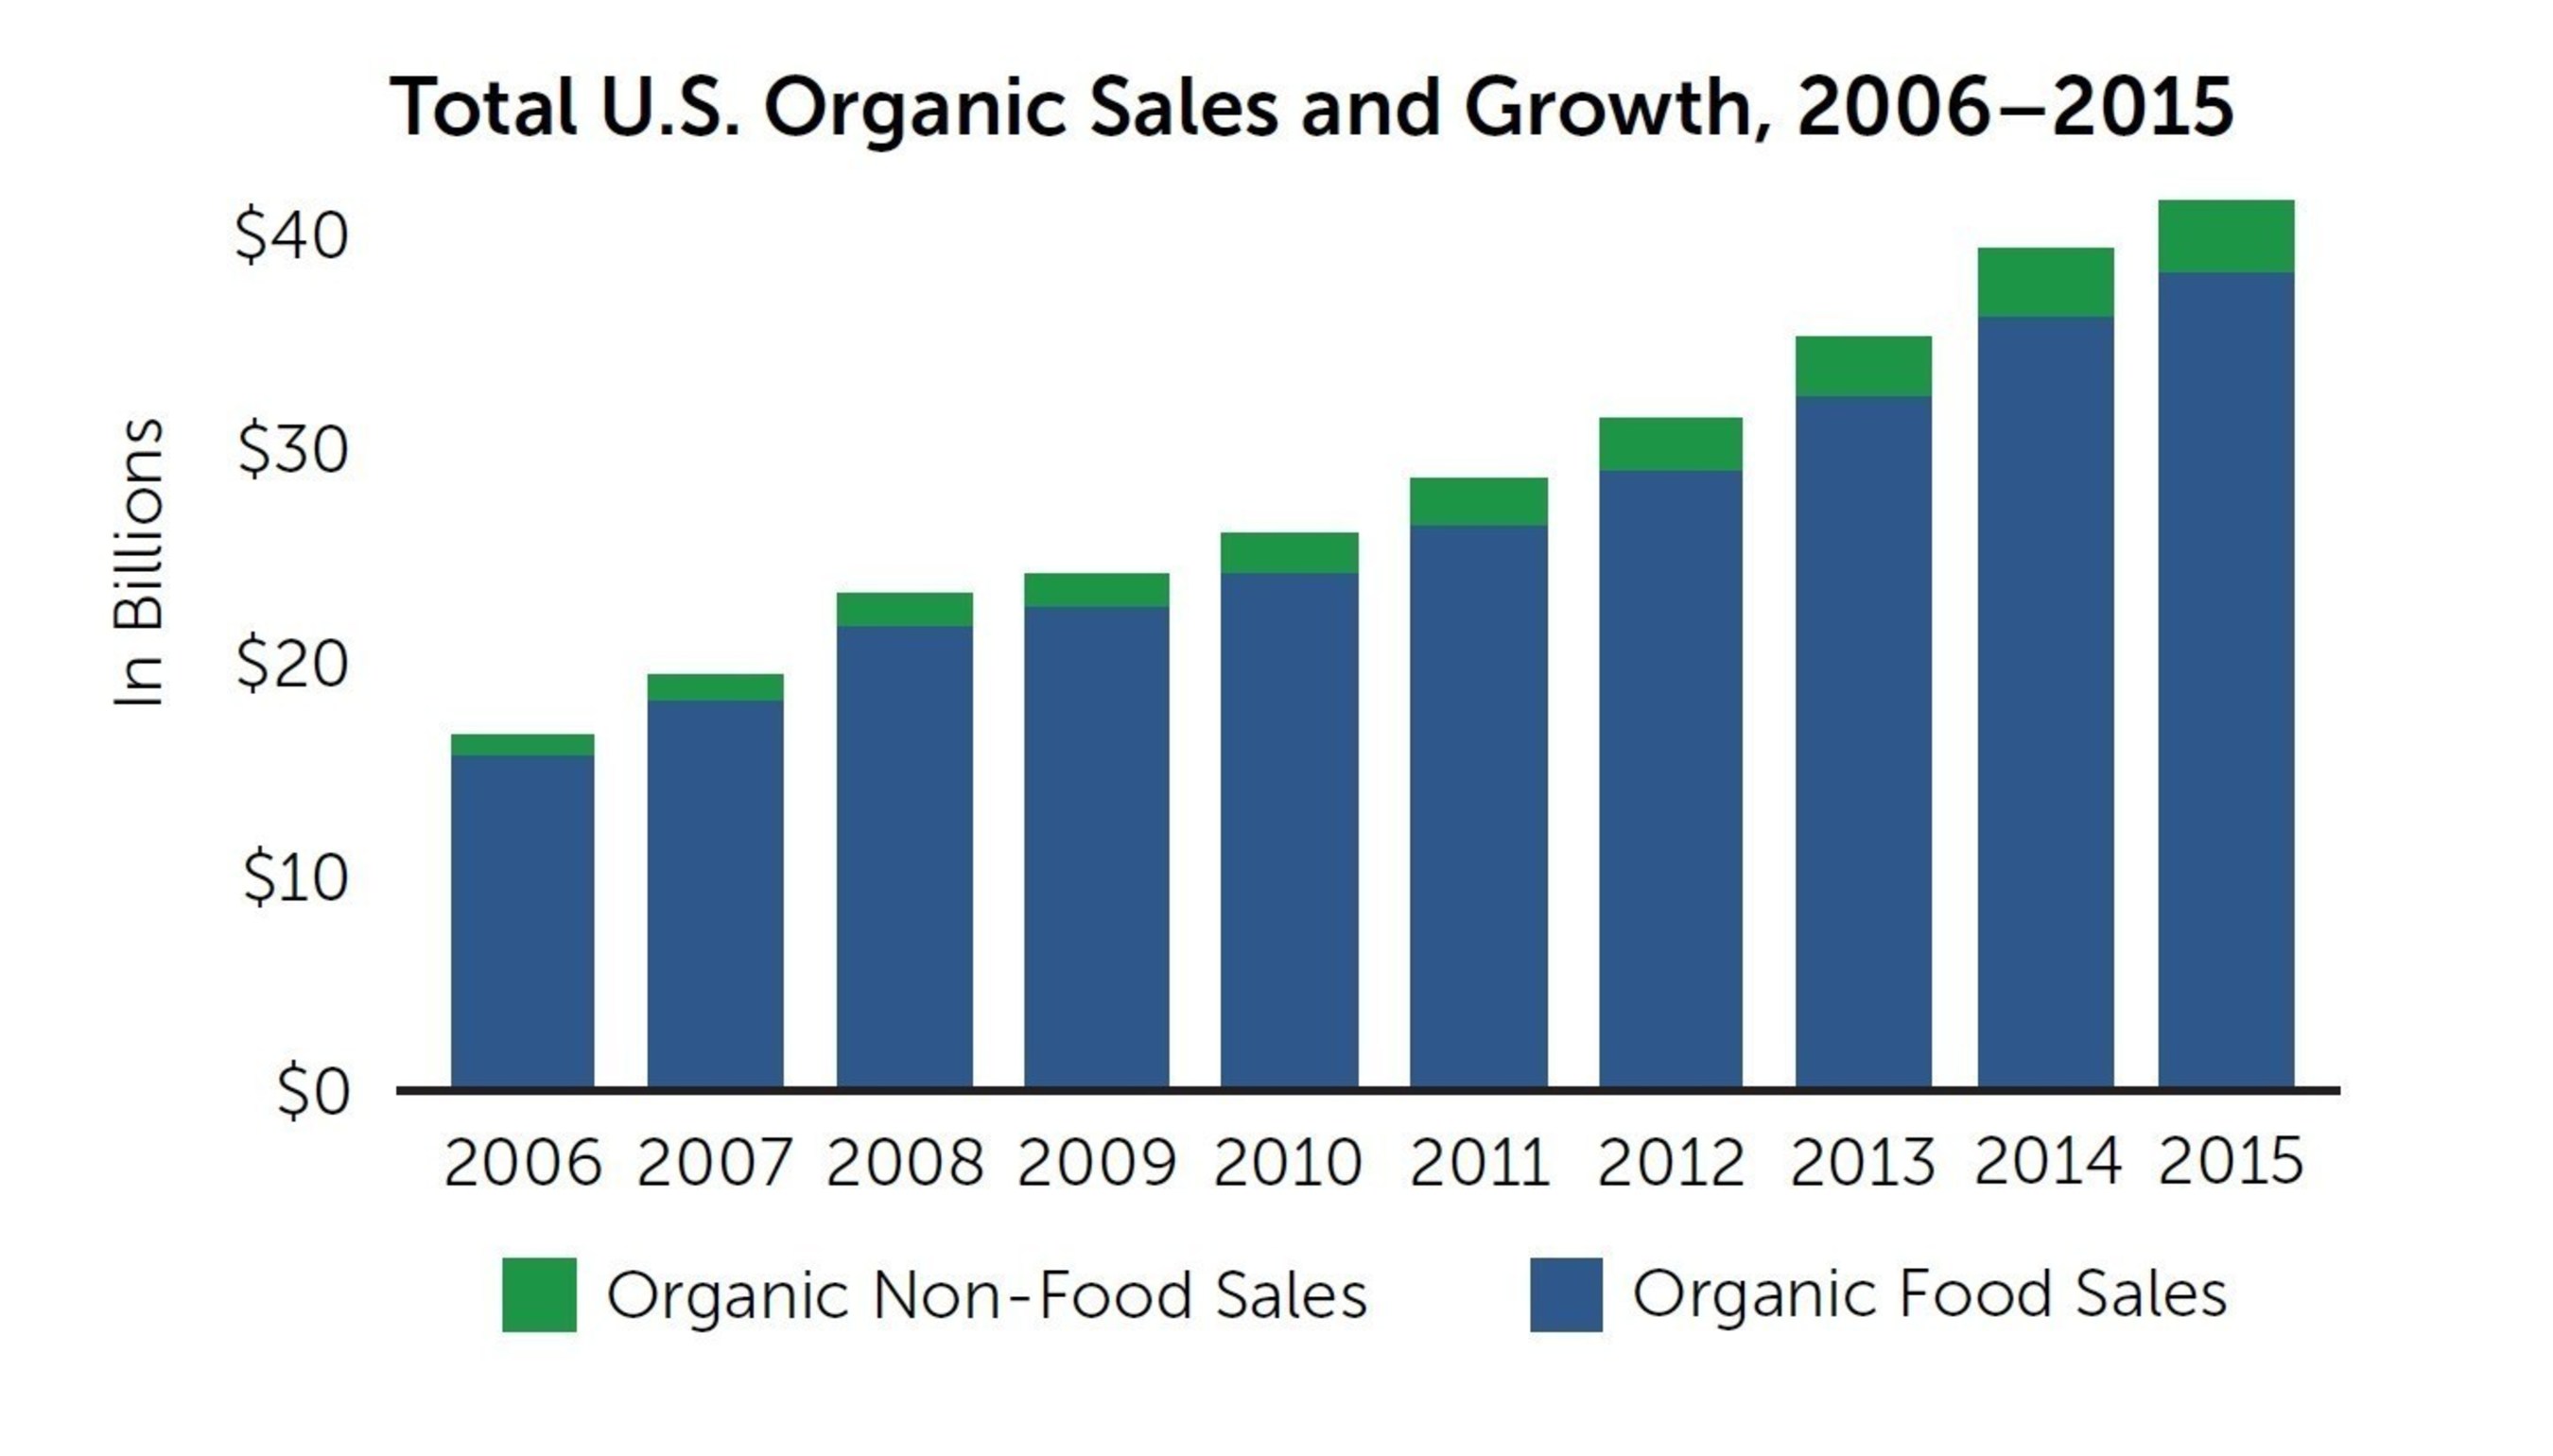 U.S. organic sales and growth over time